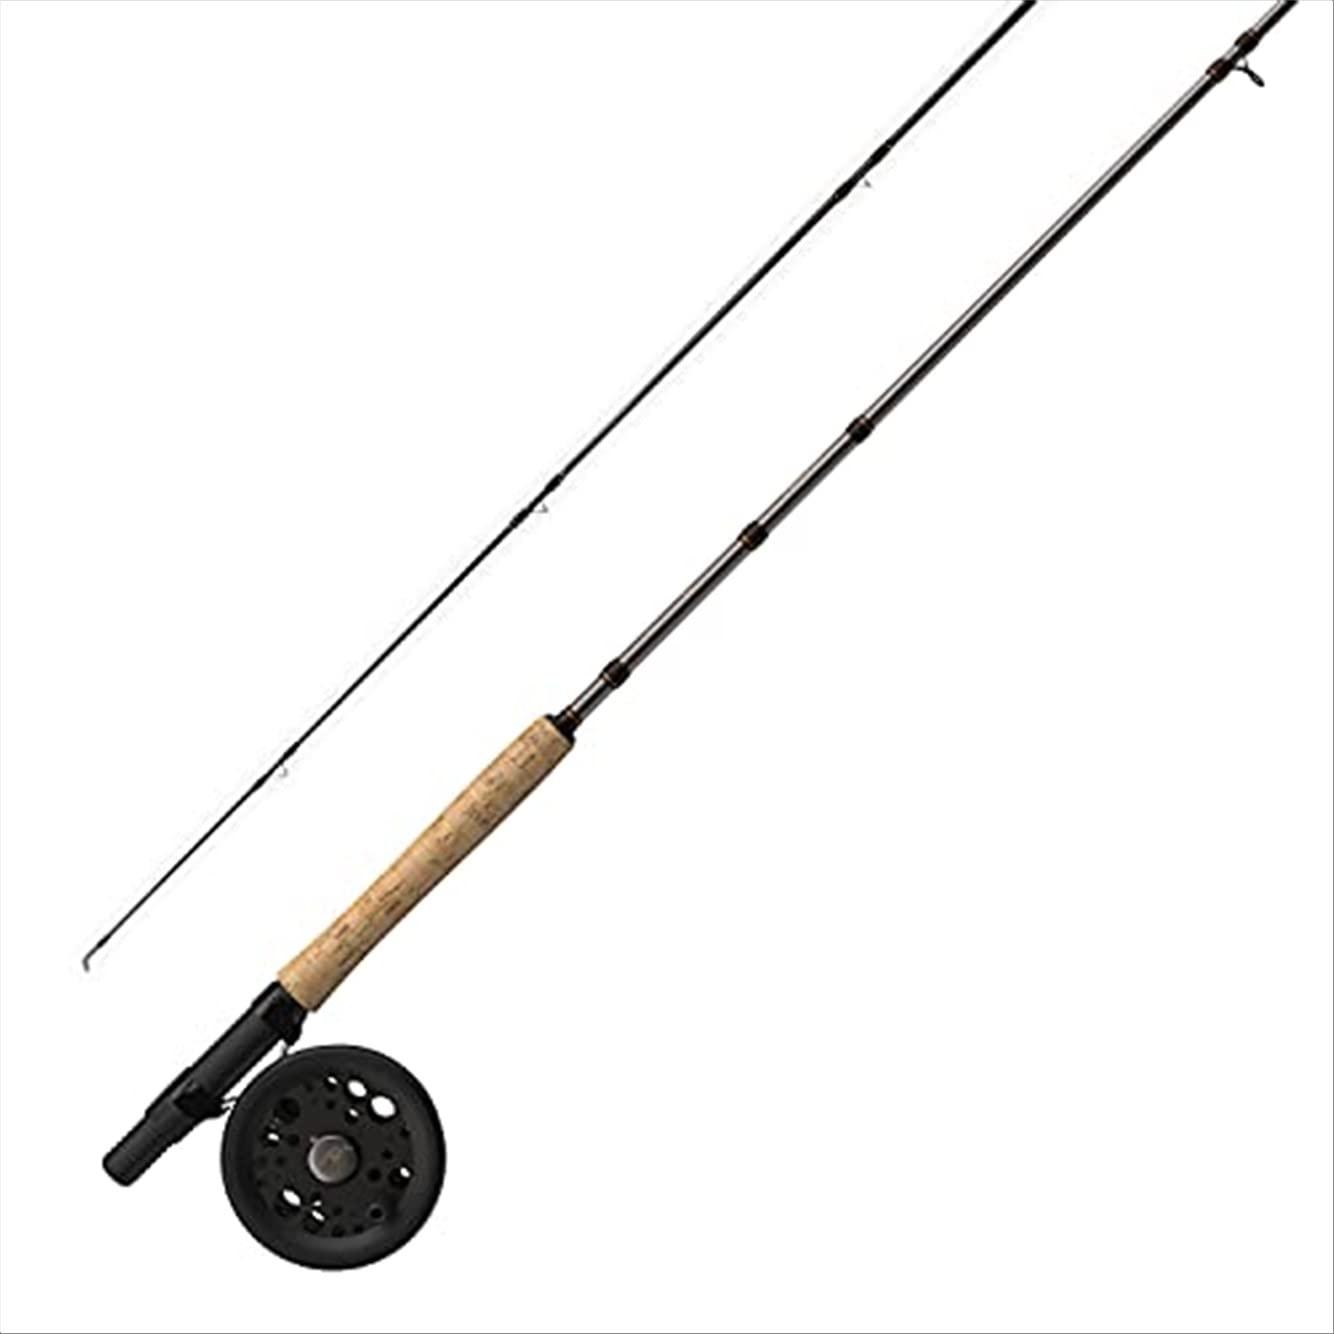 Martin Caddis Creek Fly Fishing Reel and Rod Combo, 9-Foot 7/8-Weight 2- Piece Fly Fishing Pole, Size 6/8 Rim-Control Single Action Reel, Natural  Cork Rod Handle, Durable Aluminum Frame, Brown